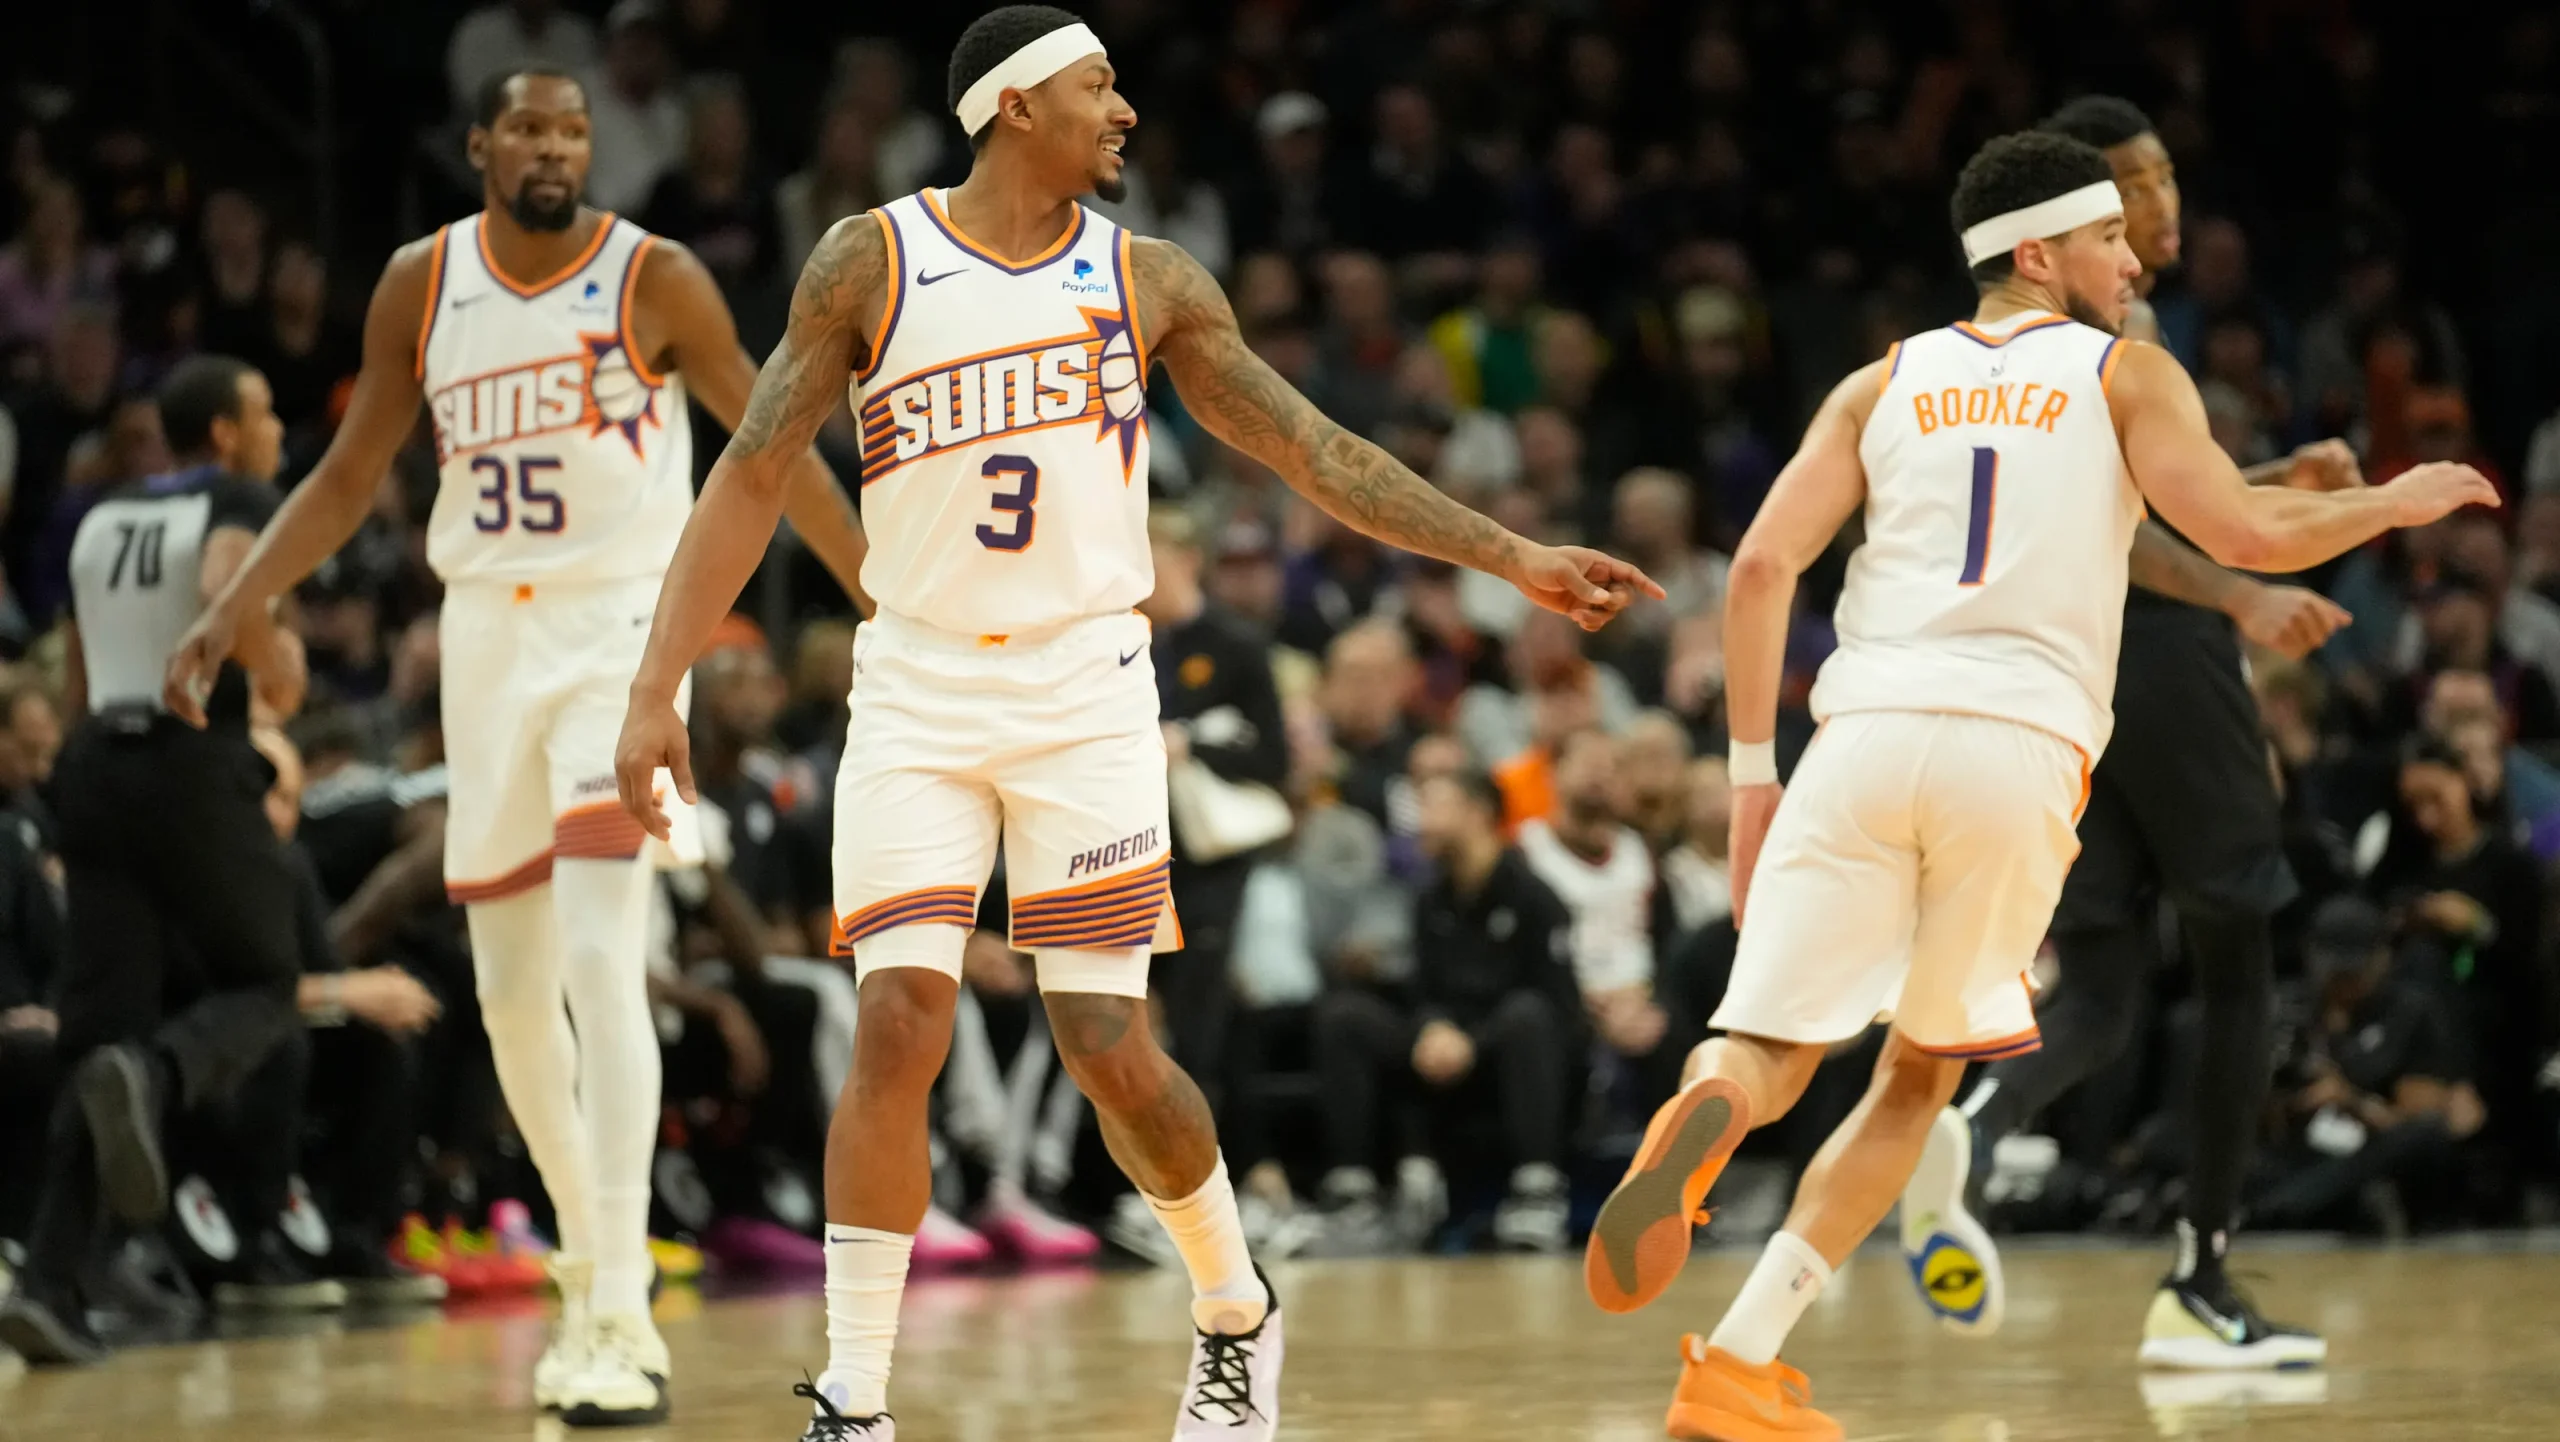 The Phoenix Suns' Pursuit for Glory A Tale of Talent and Turbulence